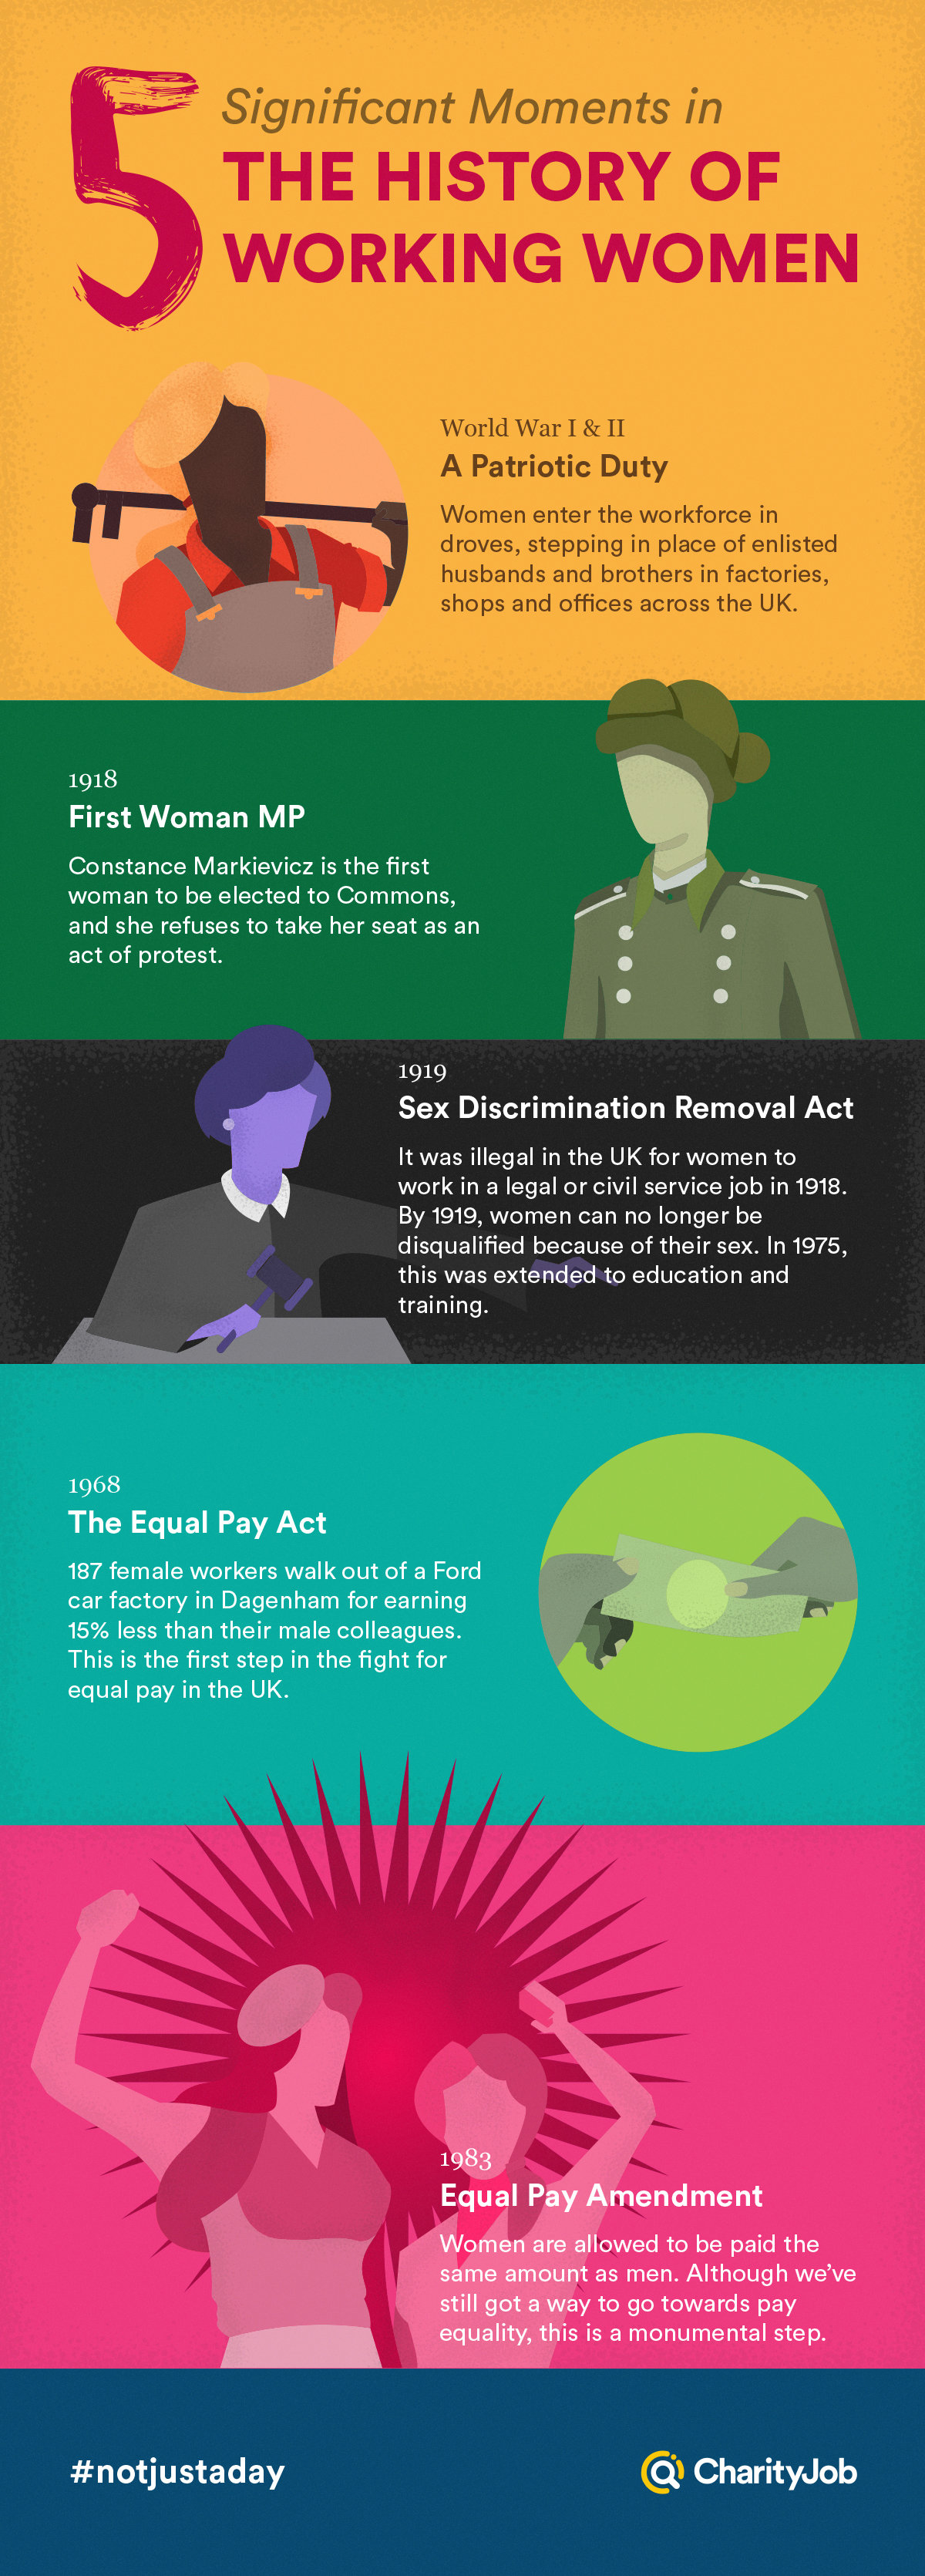 5 Significant Moments In The History of Working Women